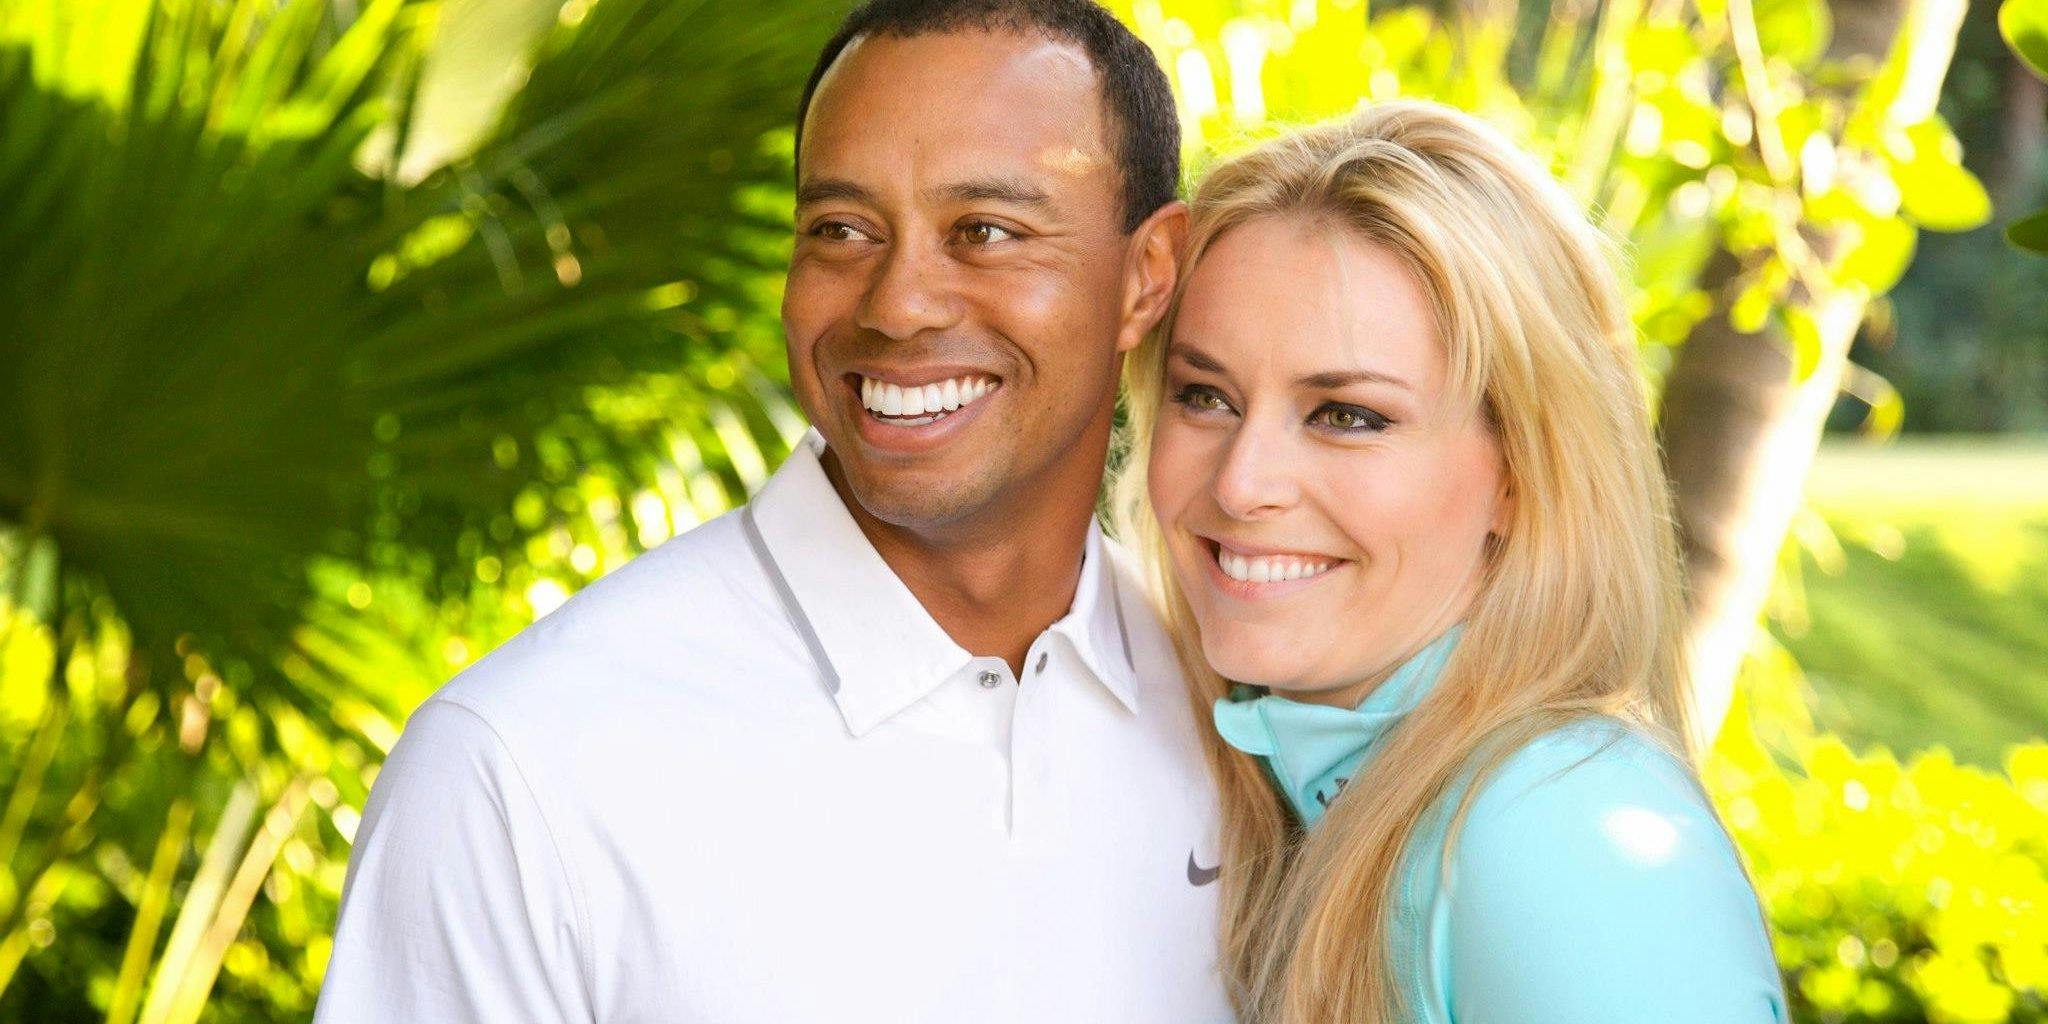 Tiger Woods And Lindsey Vonn Make It Facebook Official The Daily Dot